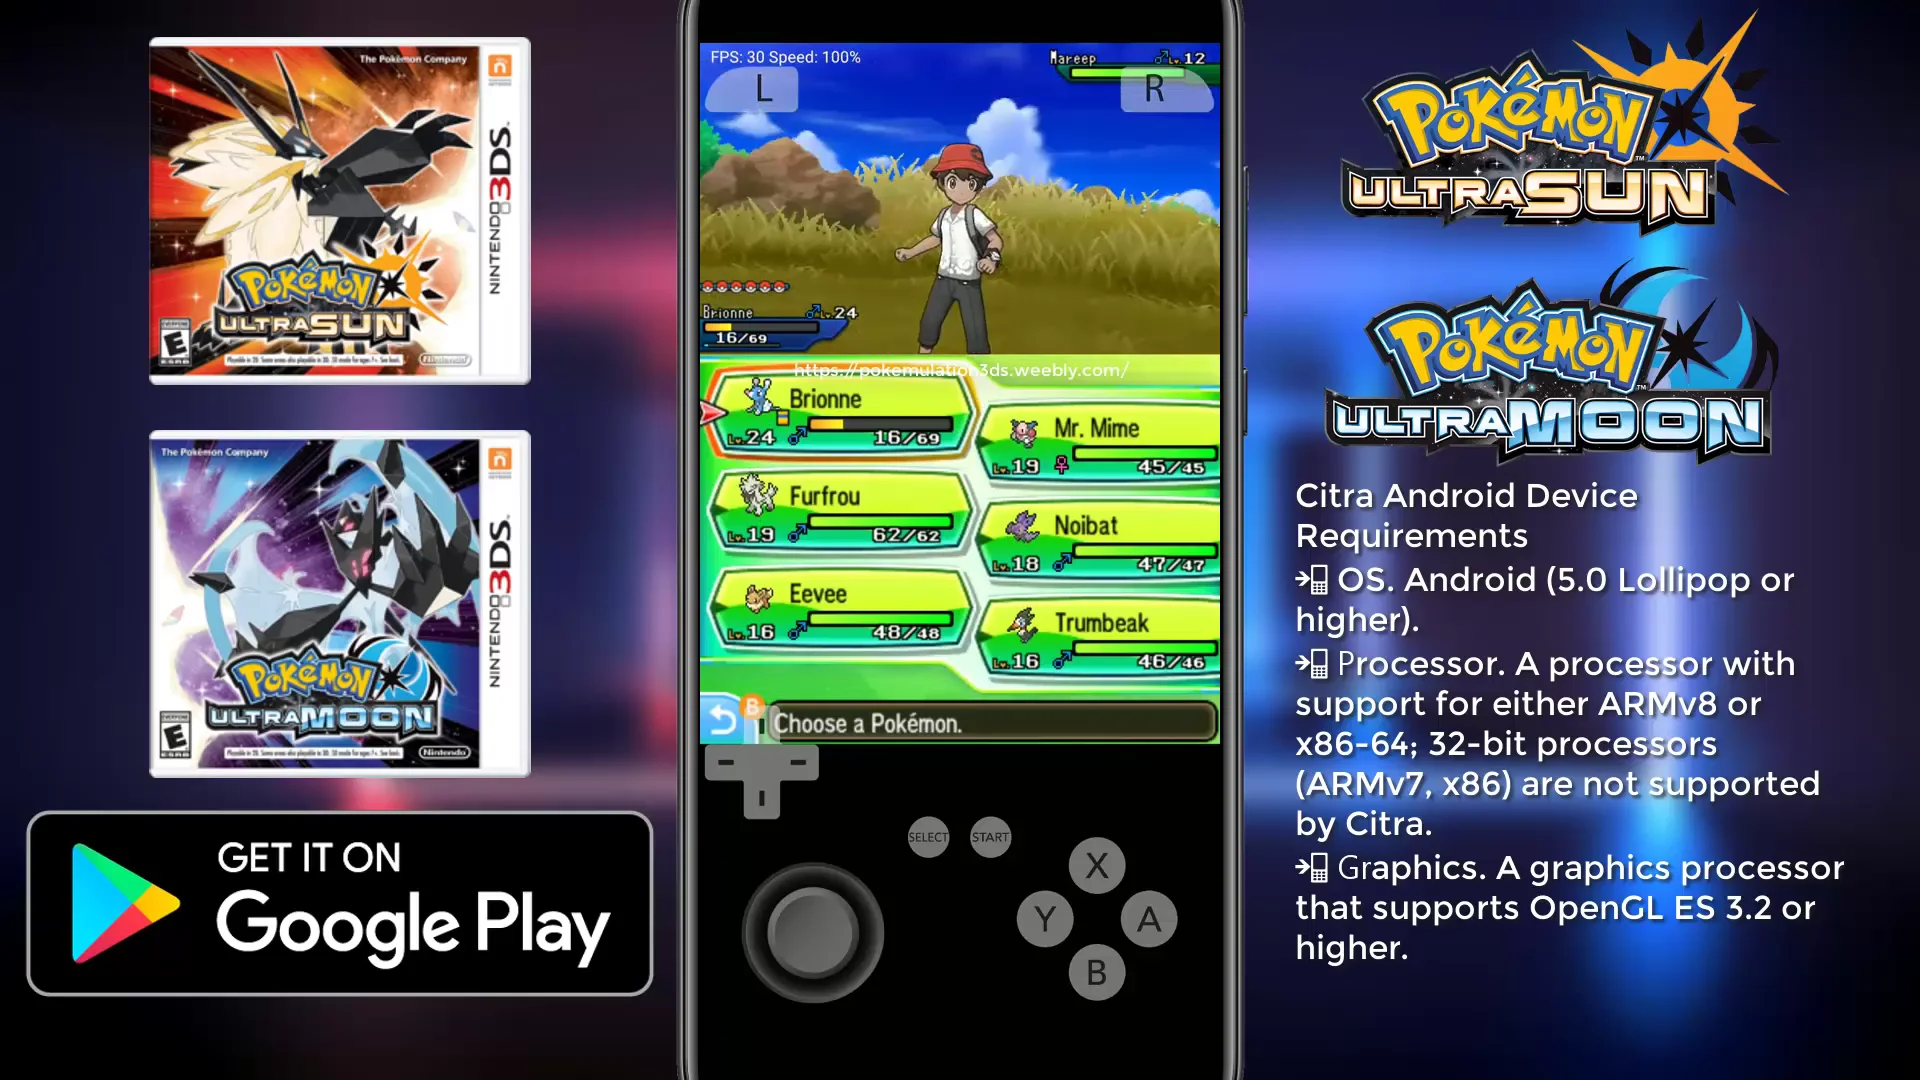 Pokémon X and Y Mobile Download Android APK OBB on Vimeo